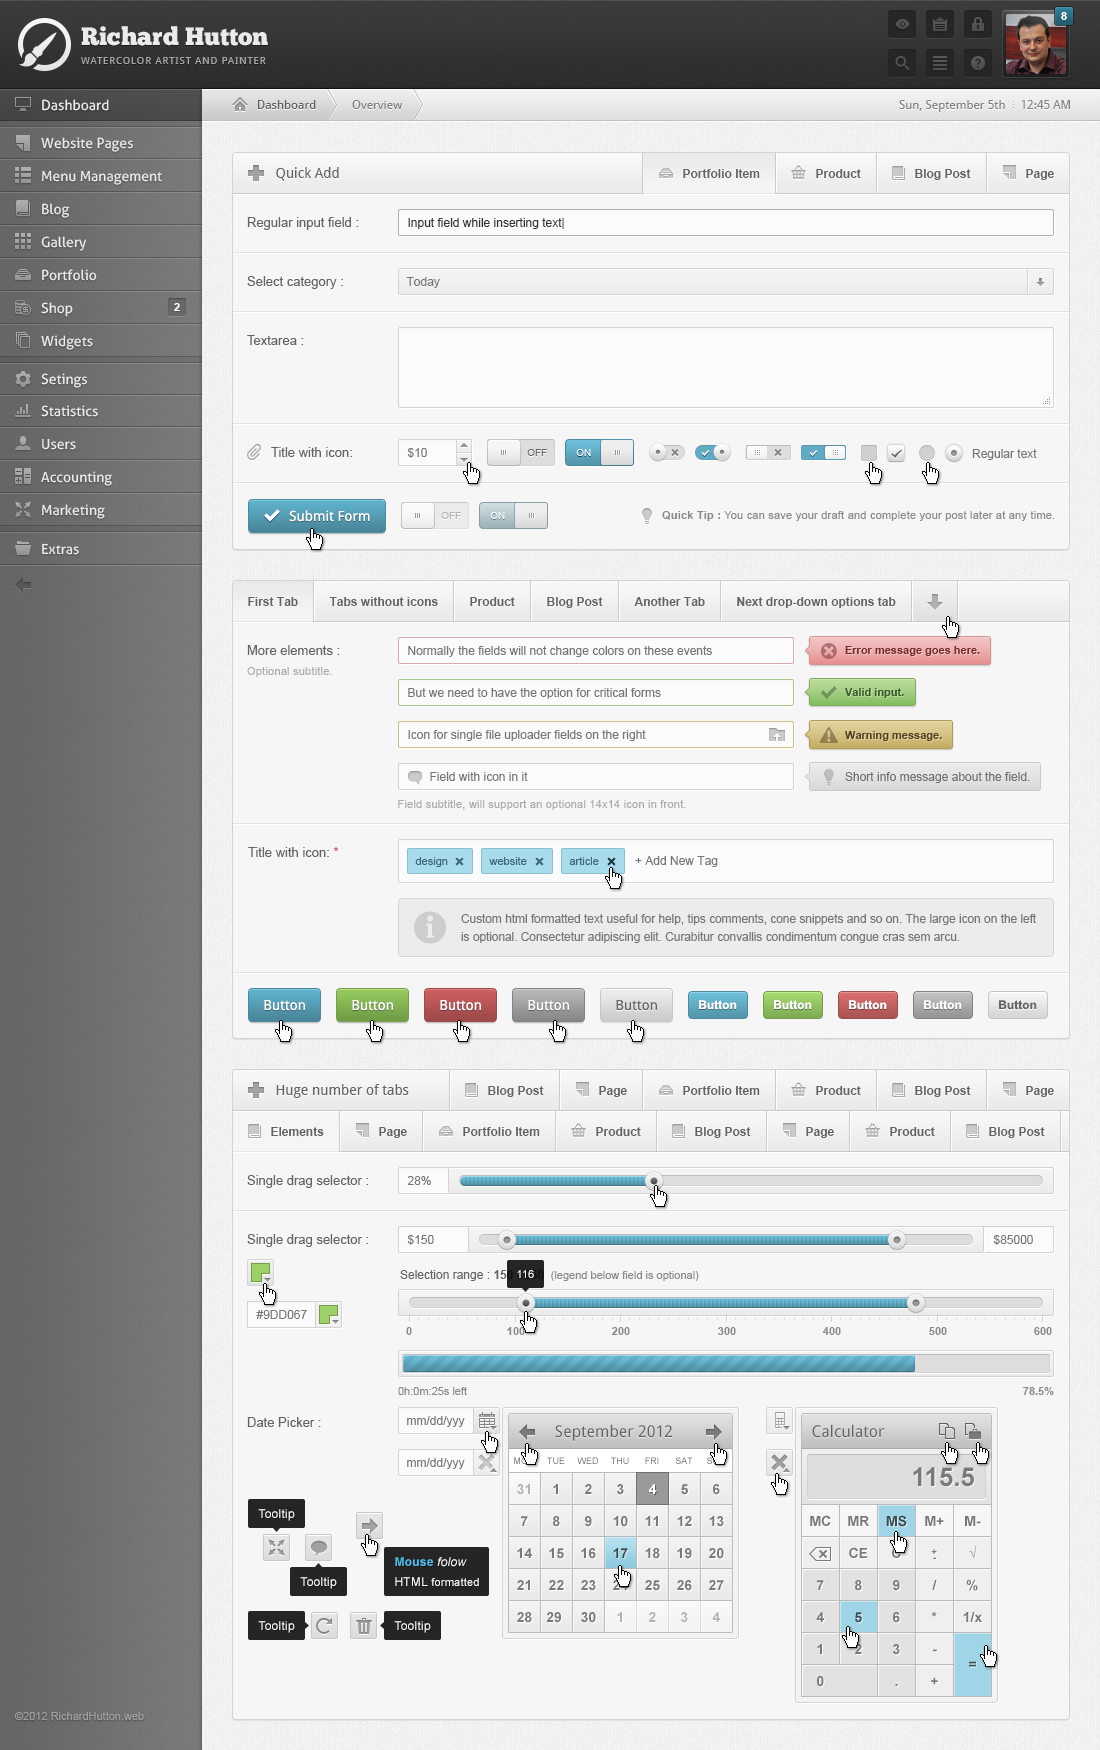 UI ux User Experience Design user interface admin panel cms Content Management System